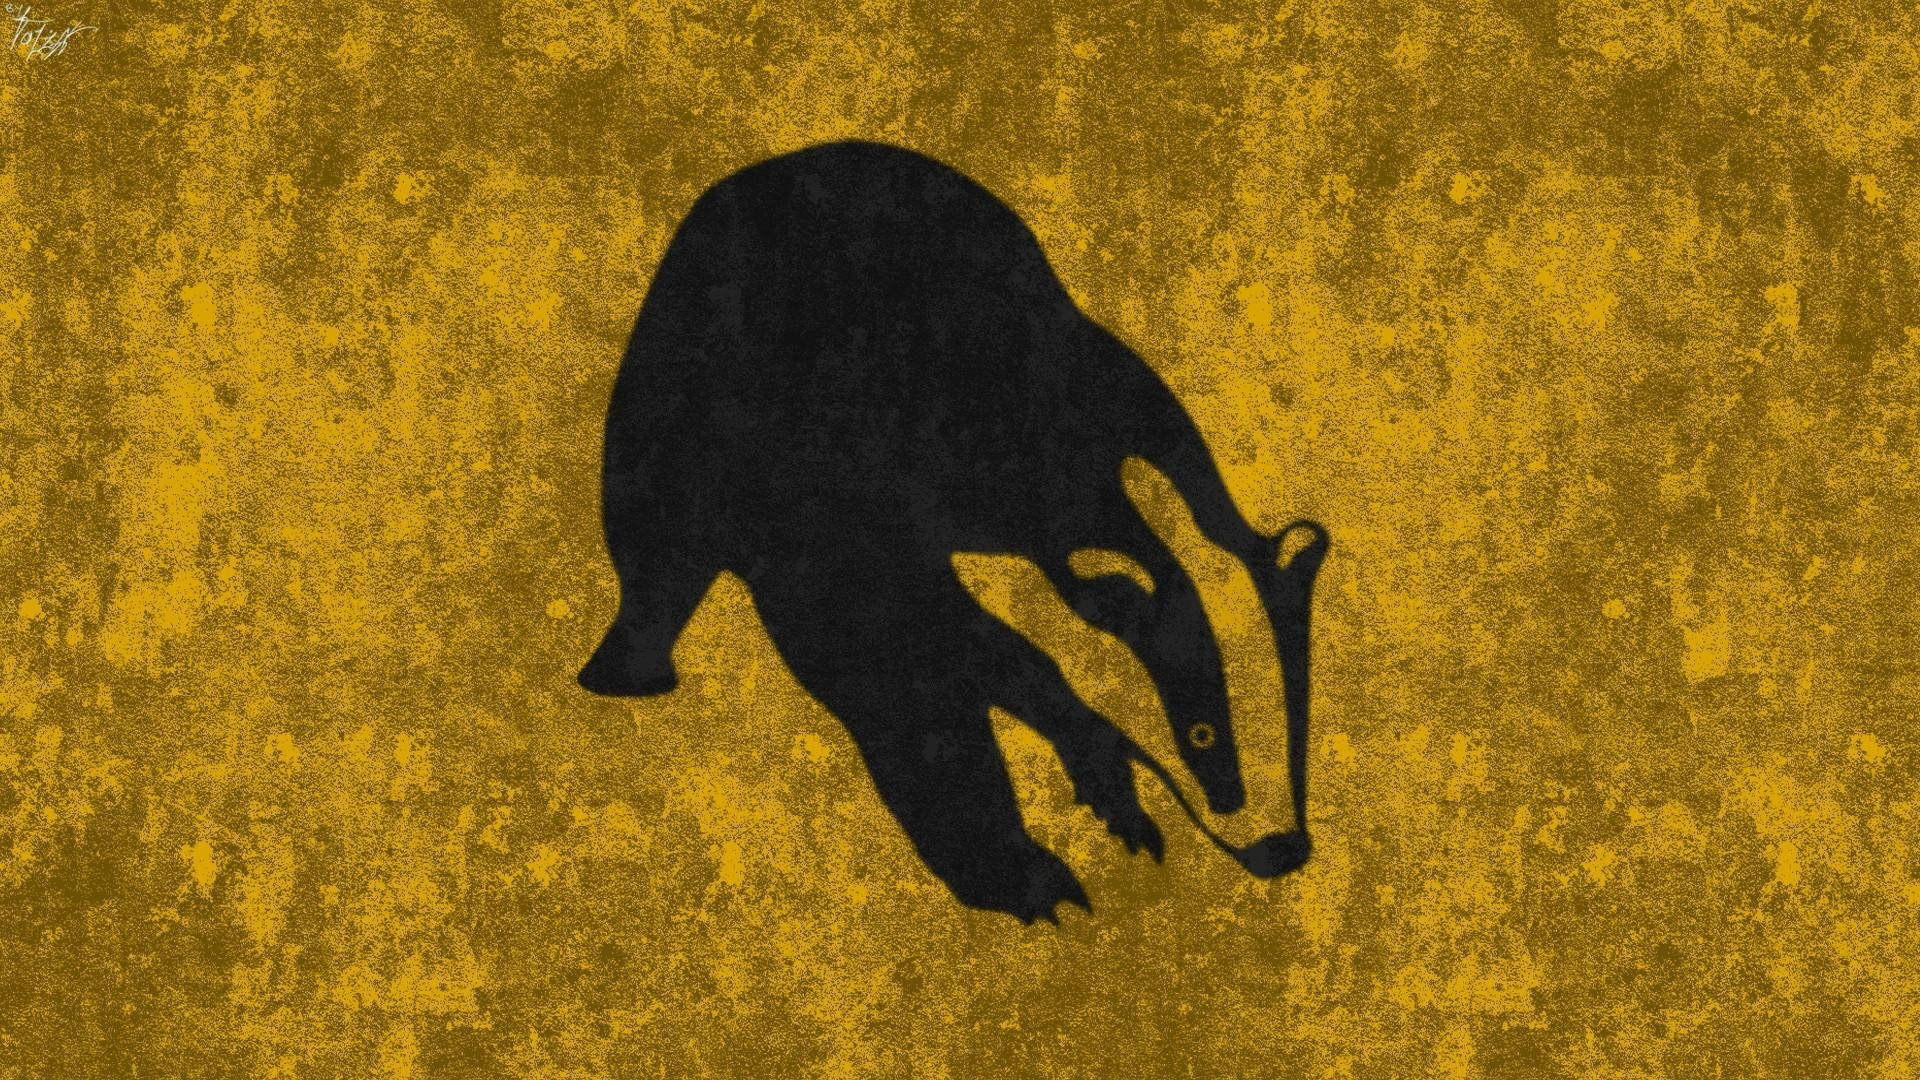 A Minimalistic Look at the Iconic Hufflepuff Badger Wallpaper